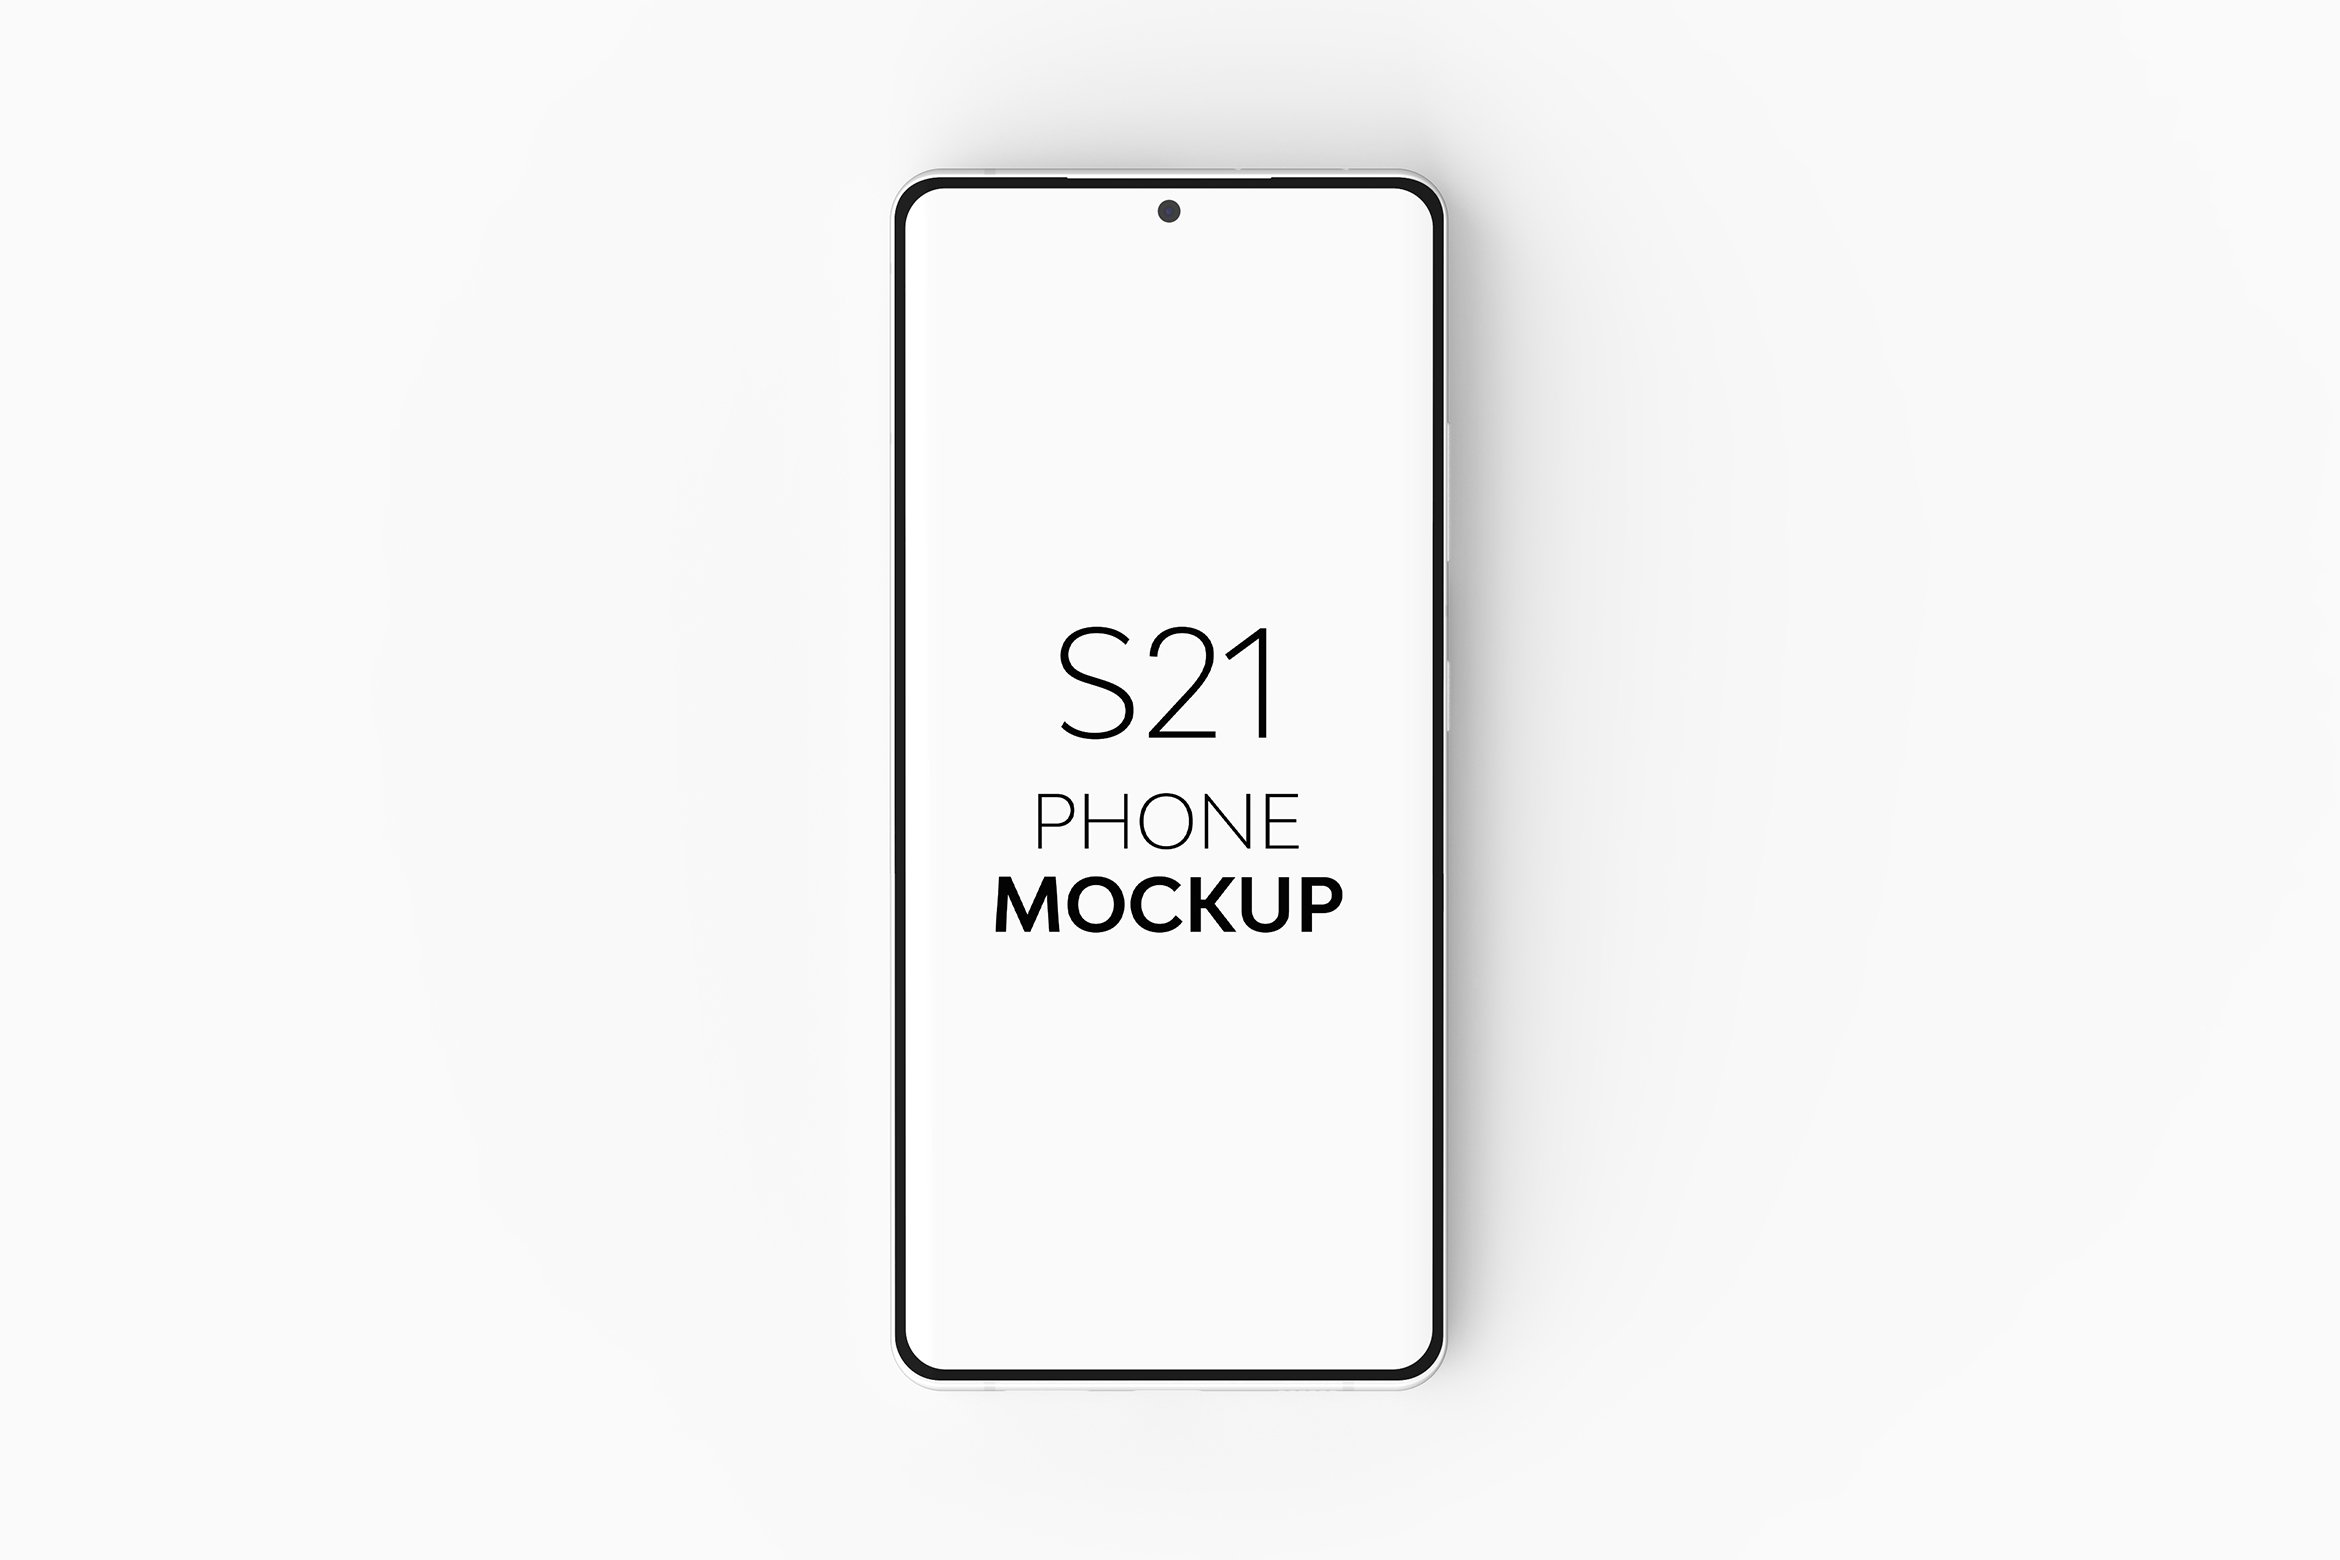 S21 Phone Mockup cover image.